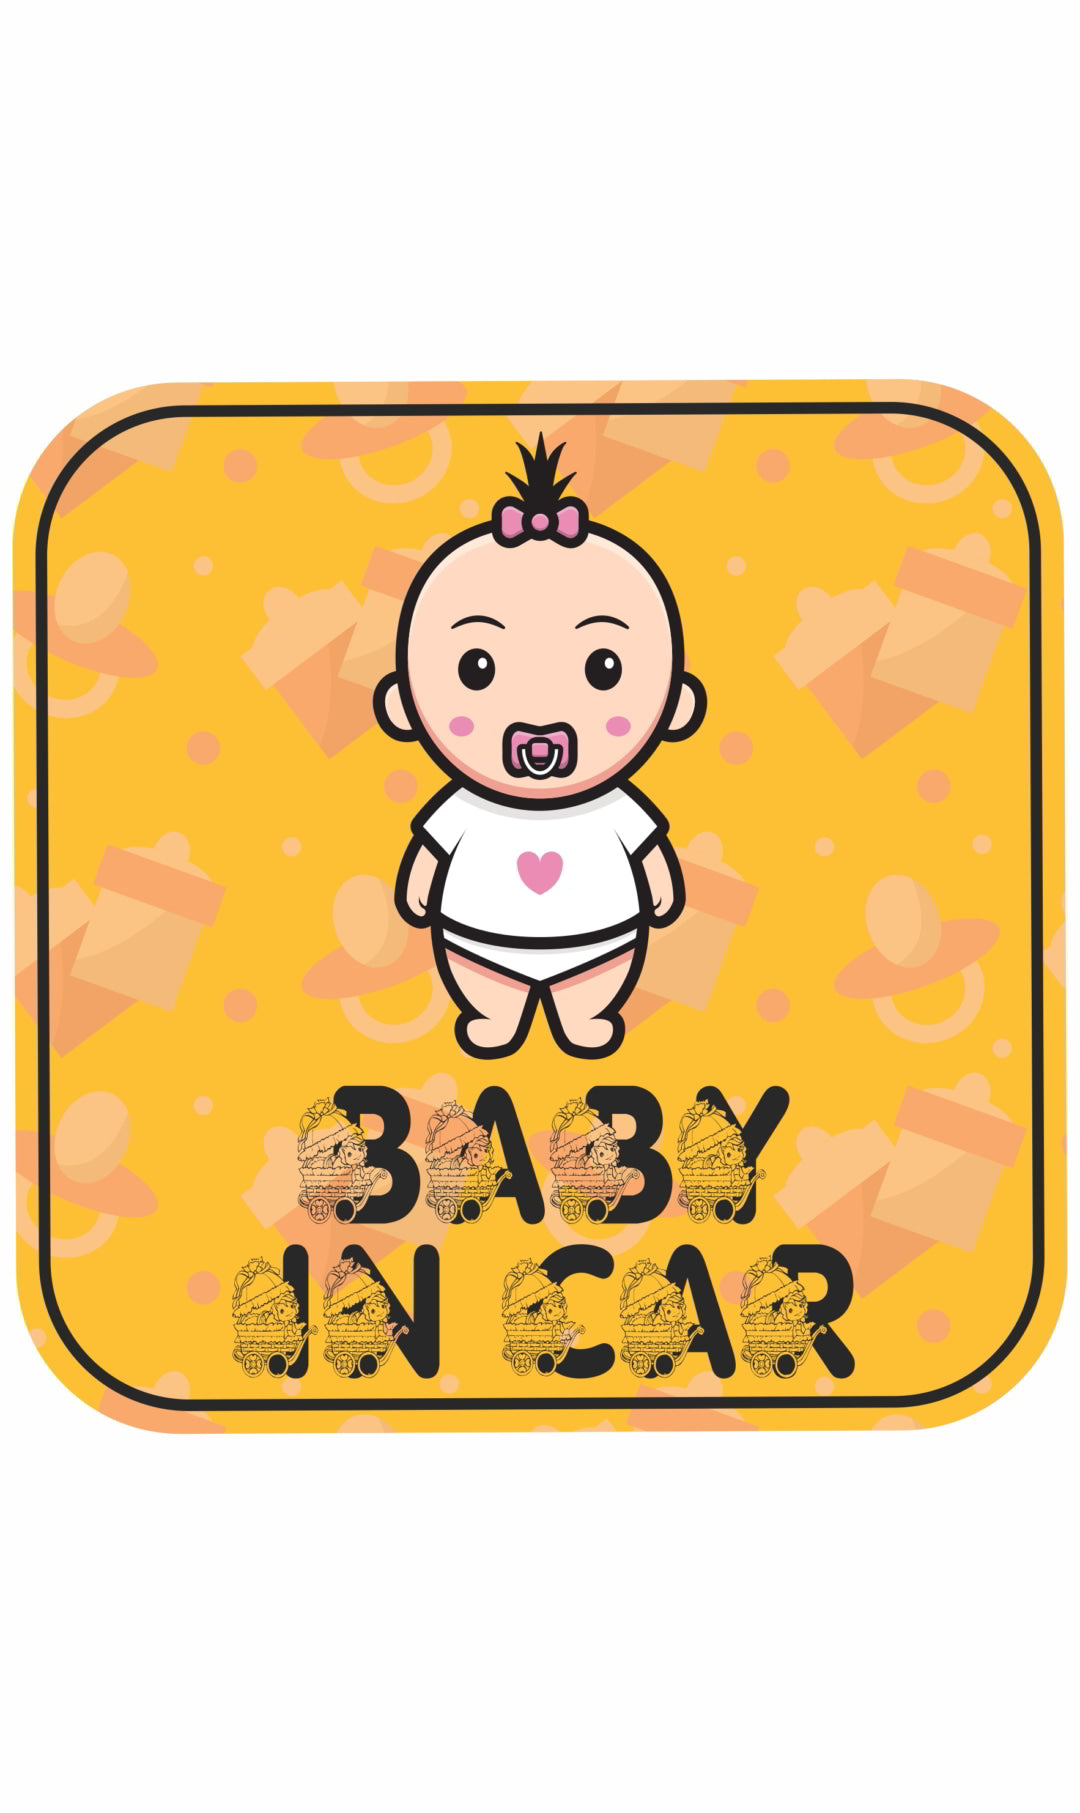 Baby in Car Decal Sticker(2pc)_c22